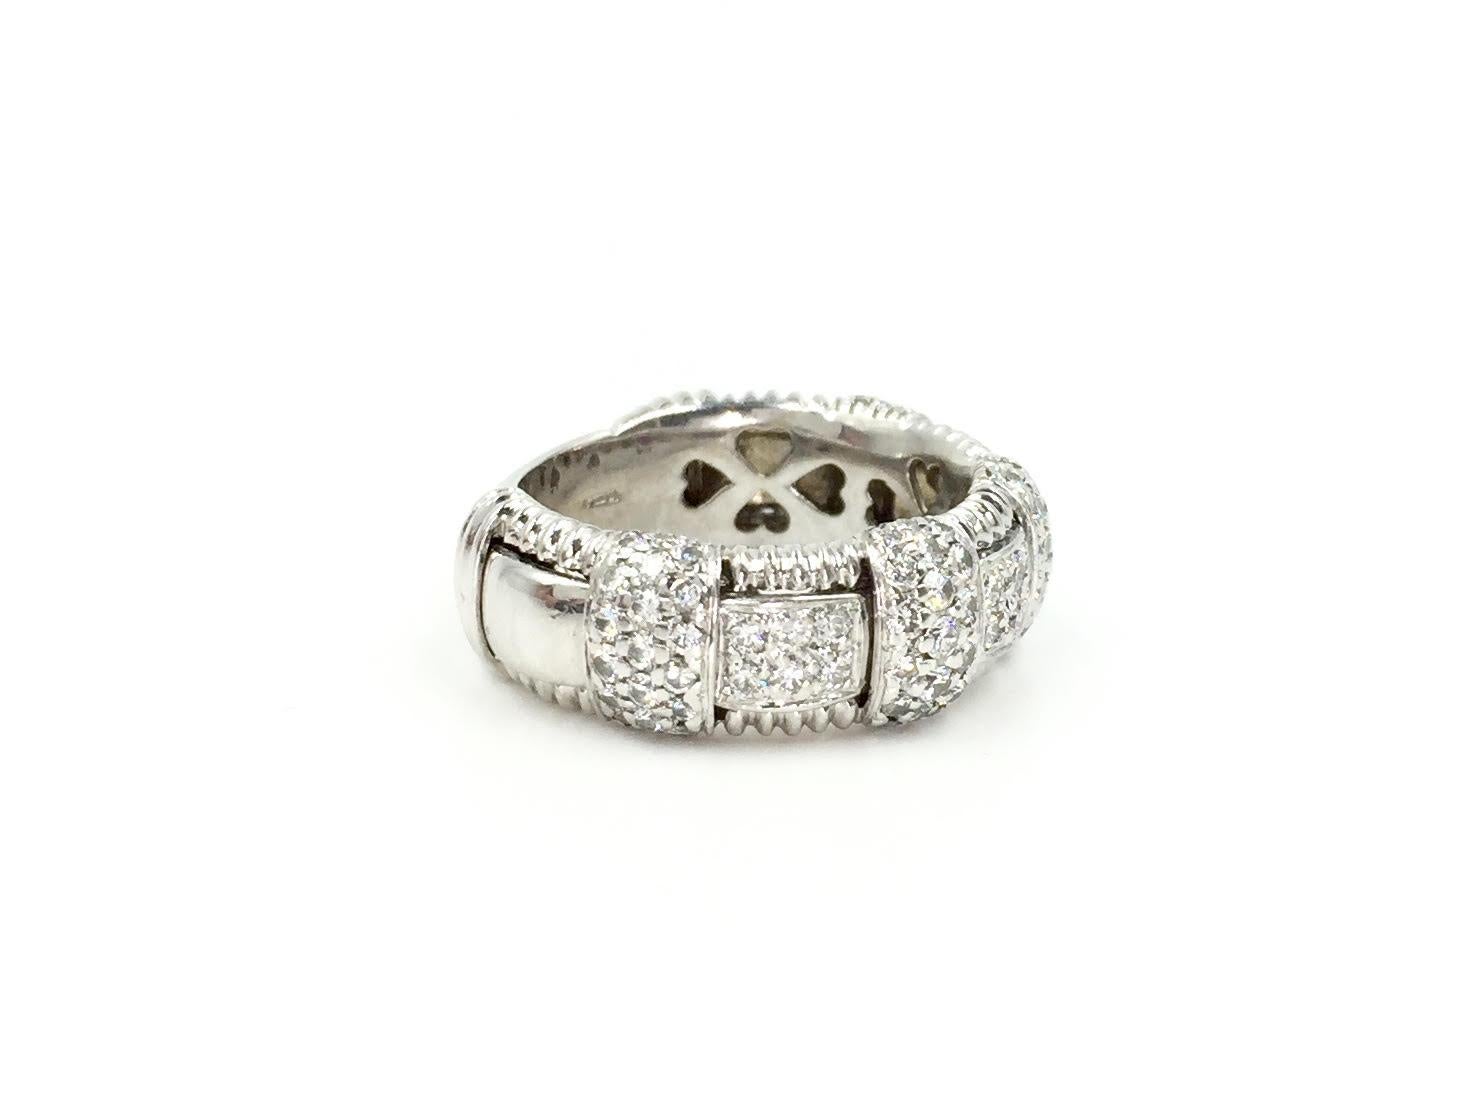 Designed by Roberto Coin as part of the Appassionata collection, this 18k white gold ring consists of expertly pave set diamonds in a basket-weave design. Approximately 1.40 carats total weight of diamonds. Signed 18K ITALY with the Roberto Coin